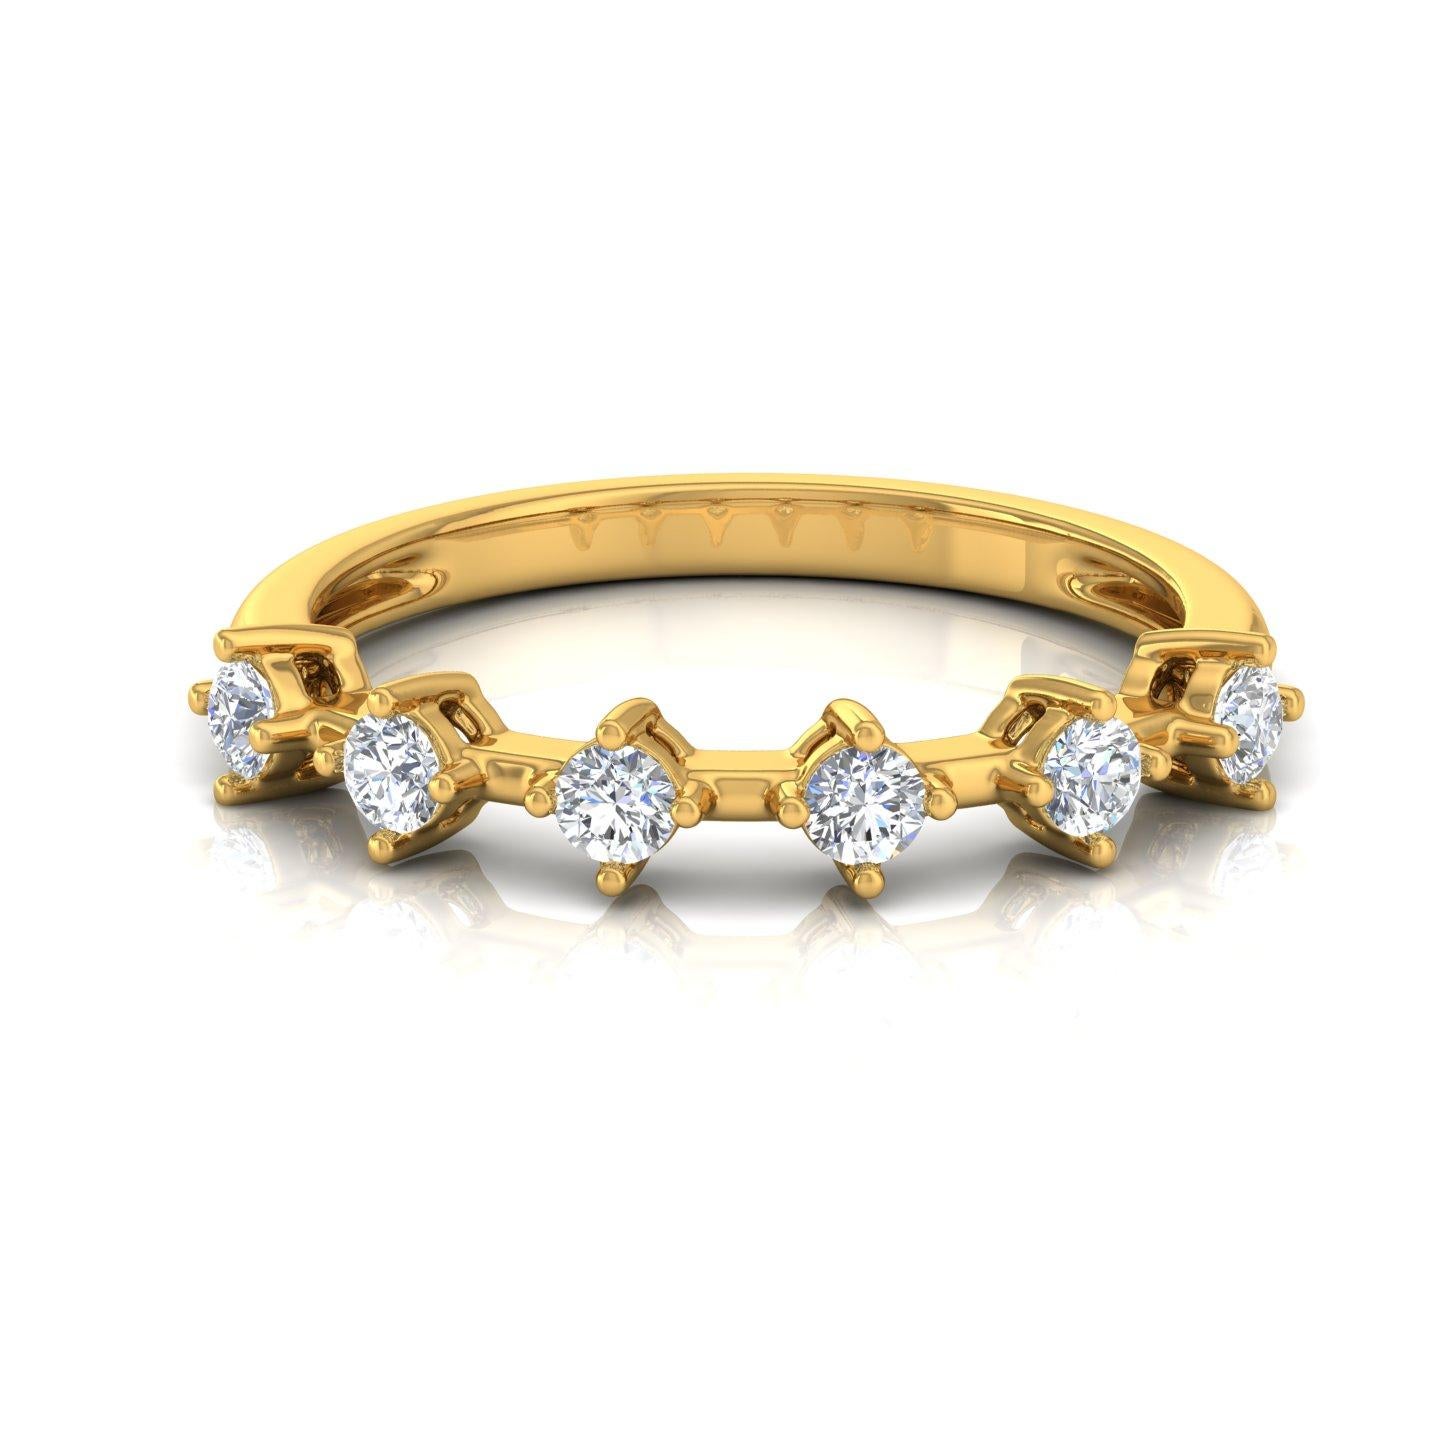 For Sale:  0.45 Carat SI Clarity HI Color Diamond Band Ring Solid 18k Yellow Gold Jewelry 6